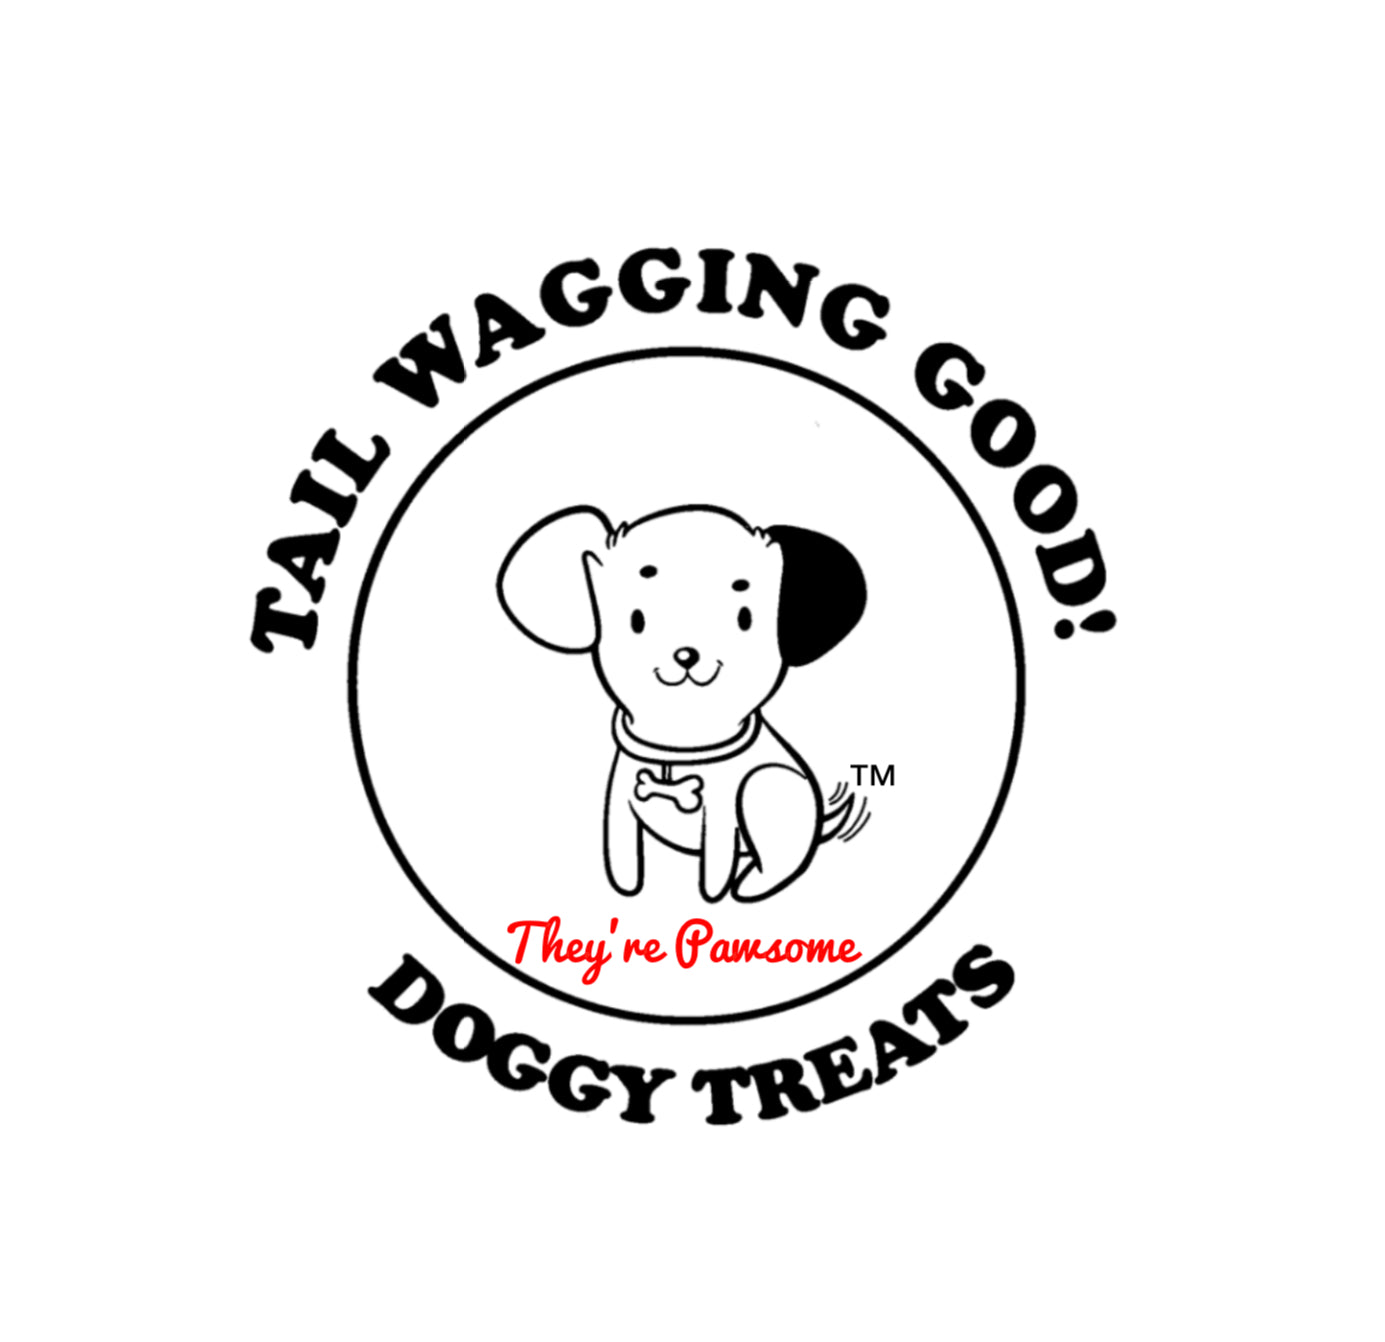 Tail Wagging Good Treats